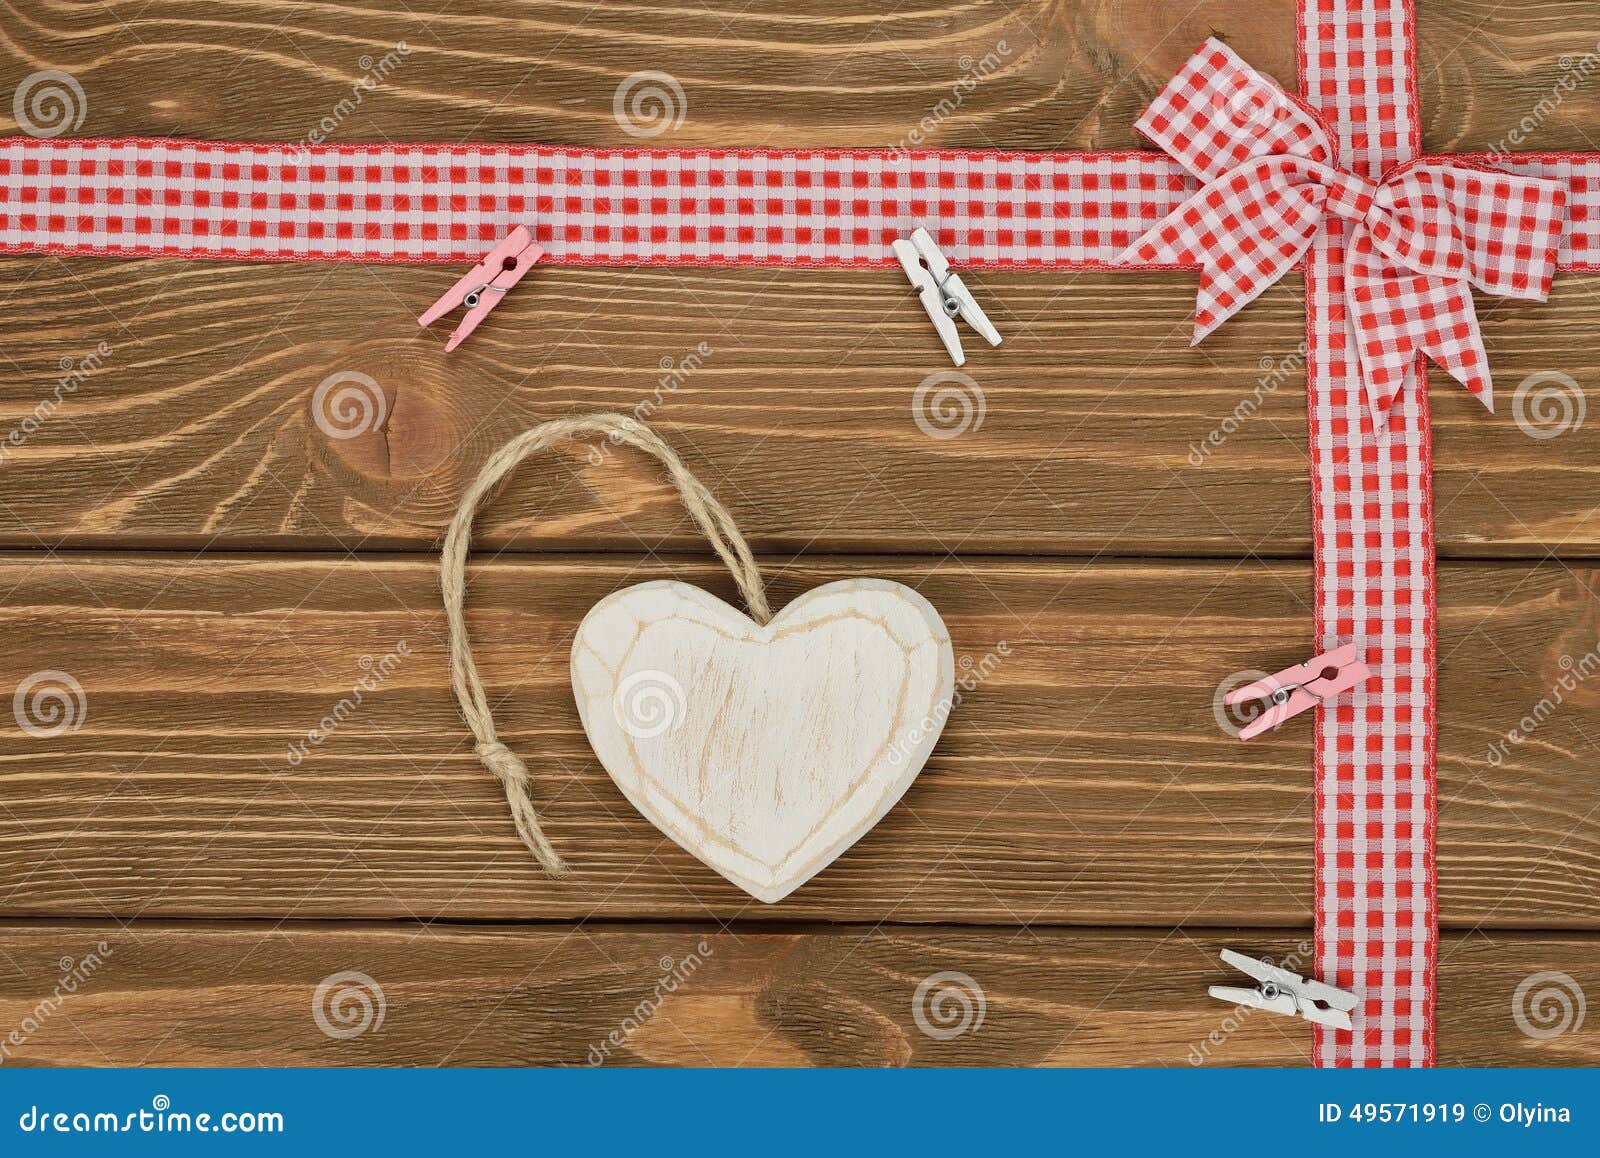 Heart and red ribbon stock image. Image of decorated - 49571919